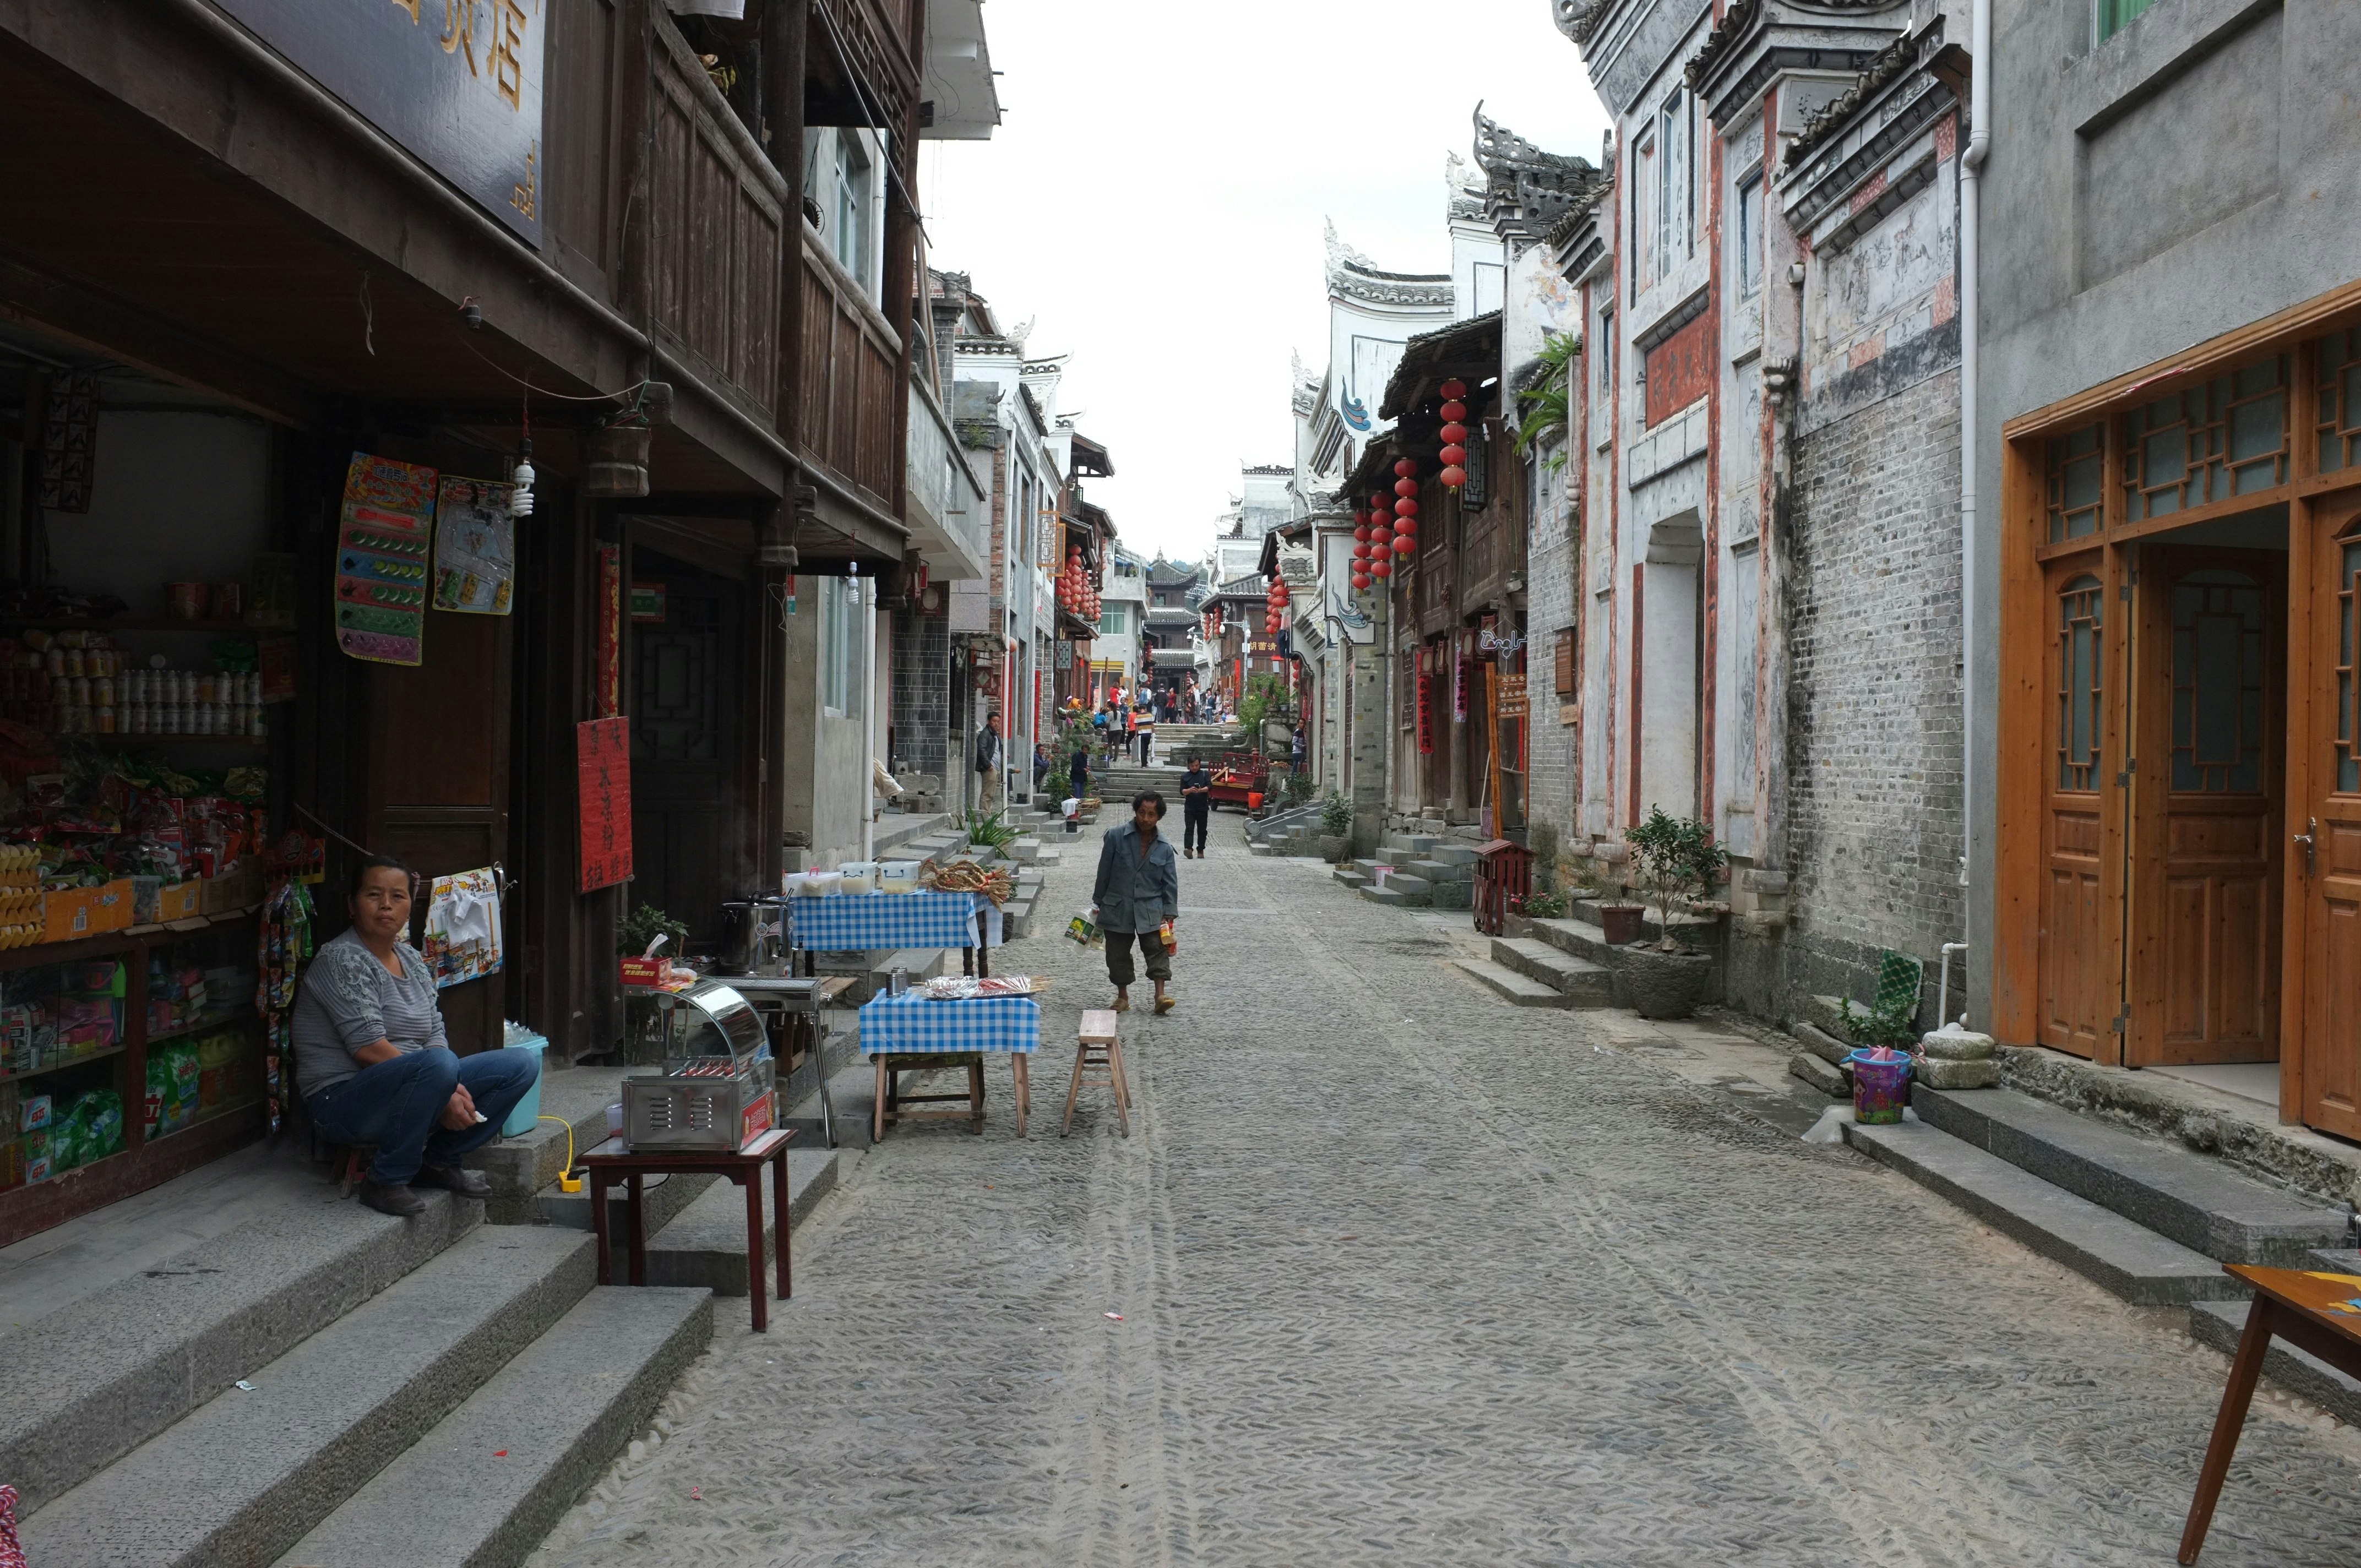 A cobblestone street with residential buildings and shopfronts on each side. A female-presenting figure sits on the steps outside a store.